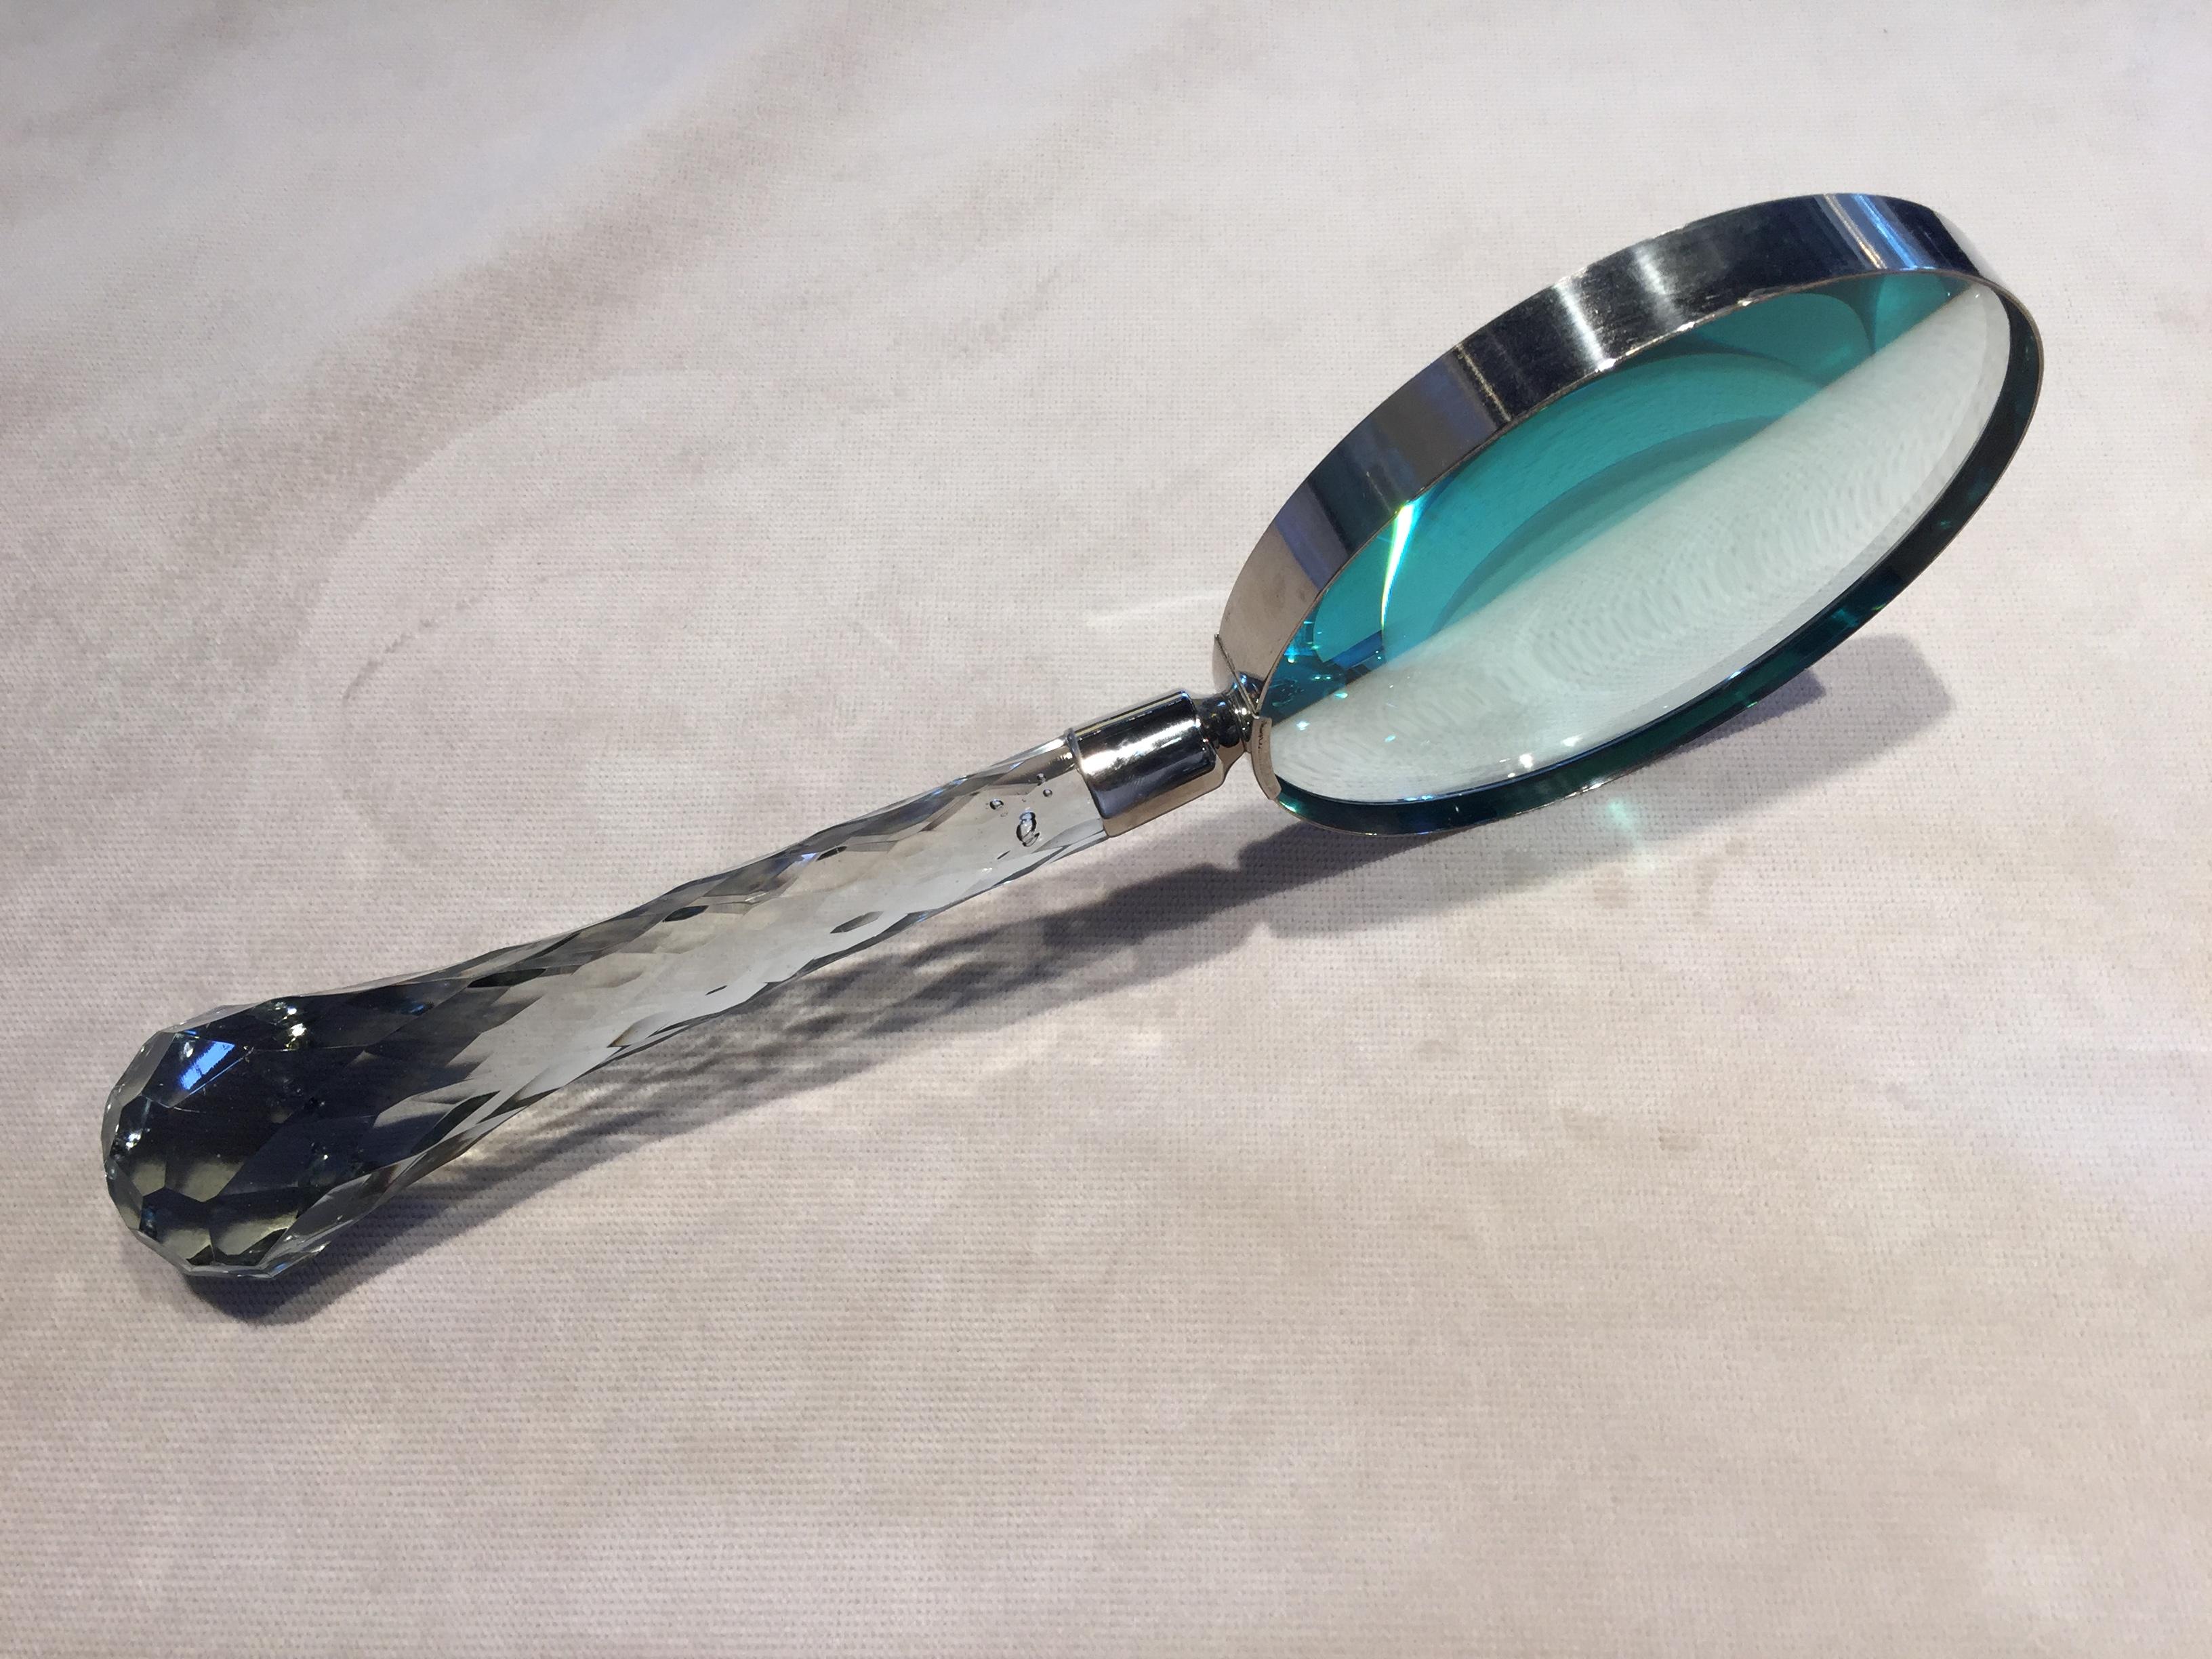 Faceted Massive Glass faceted Hand Magnifier glass